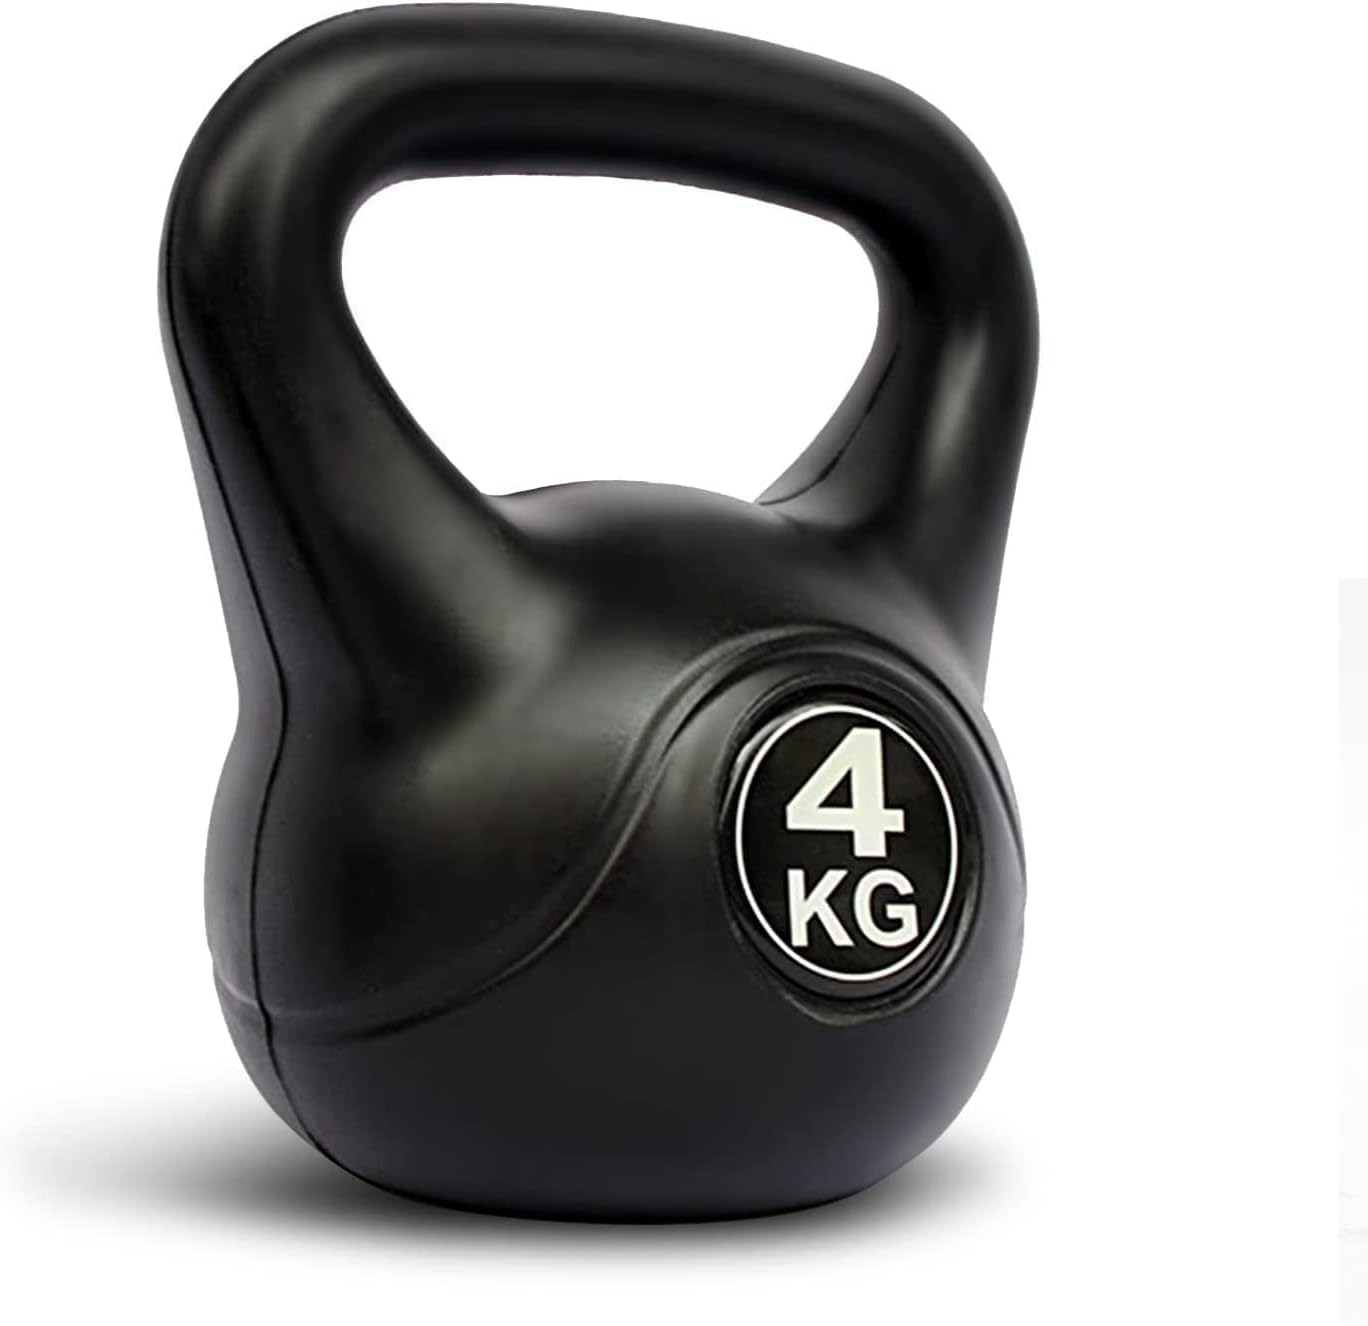 VIO Kettlebell dumbbell for Strength and Cardio Training Fitness,Heavy Weight Kettle Bell for Home Gym BLACK